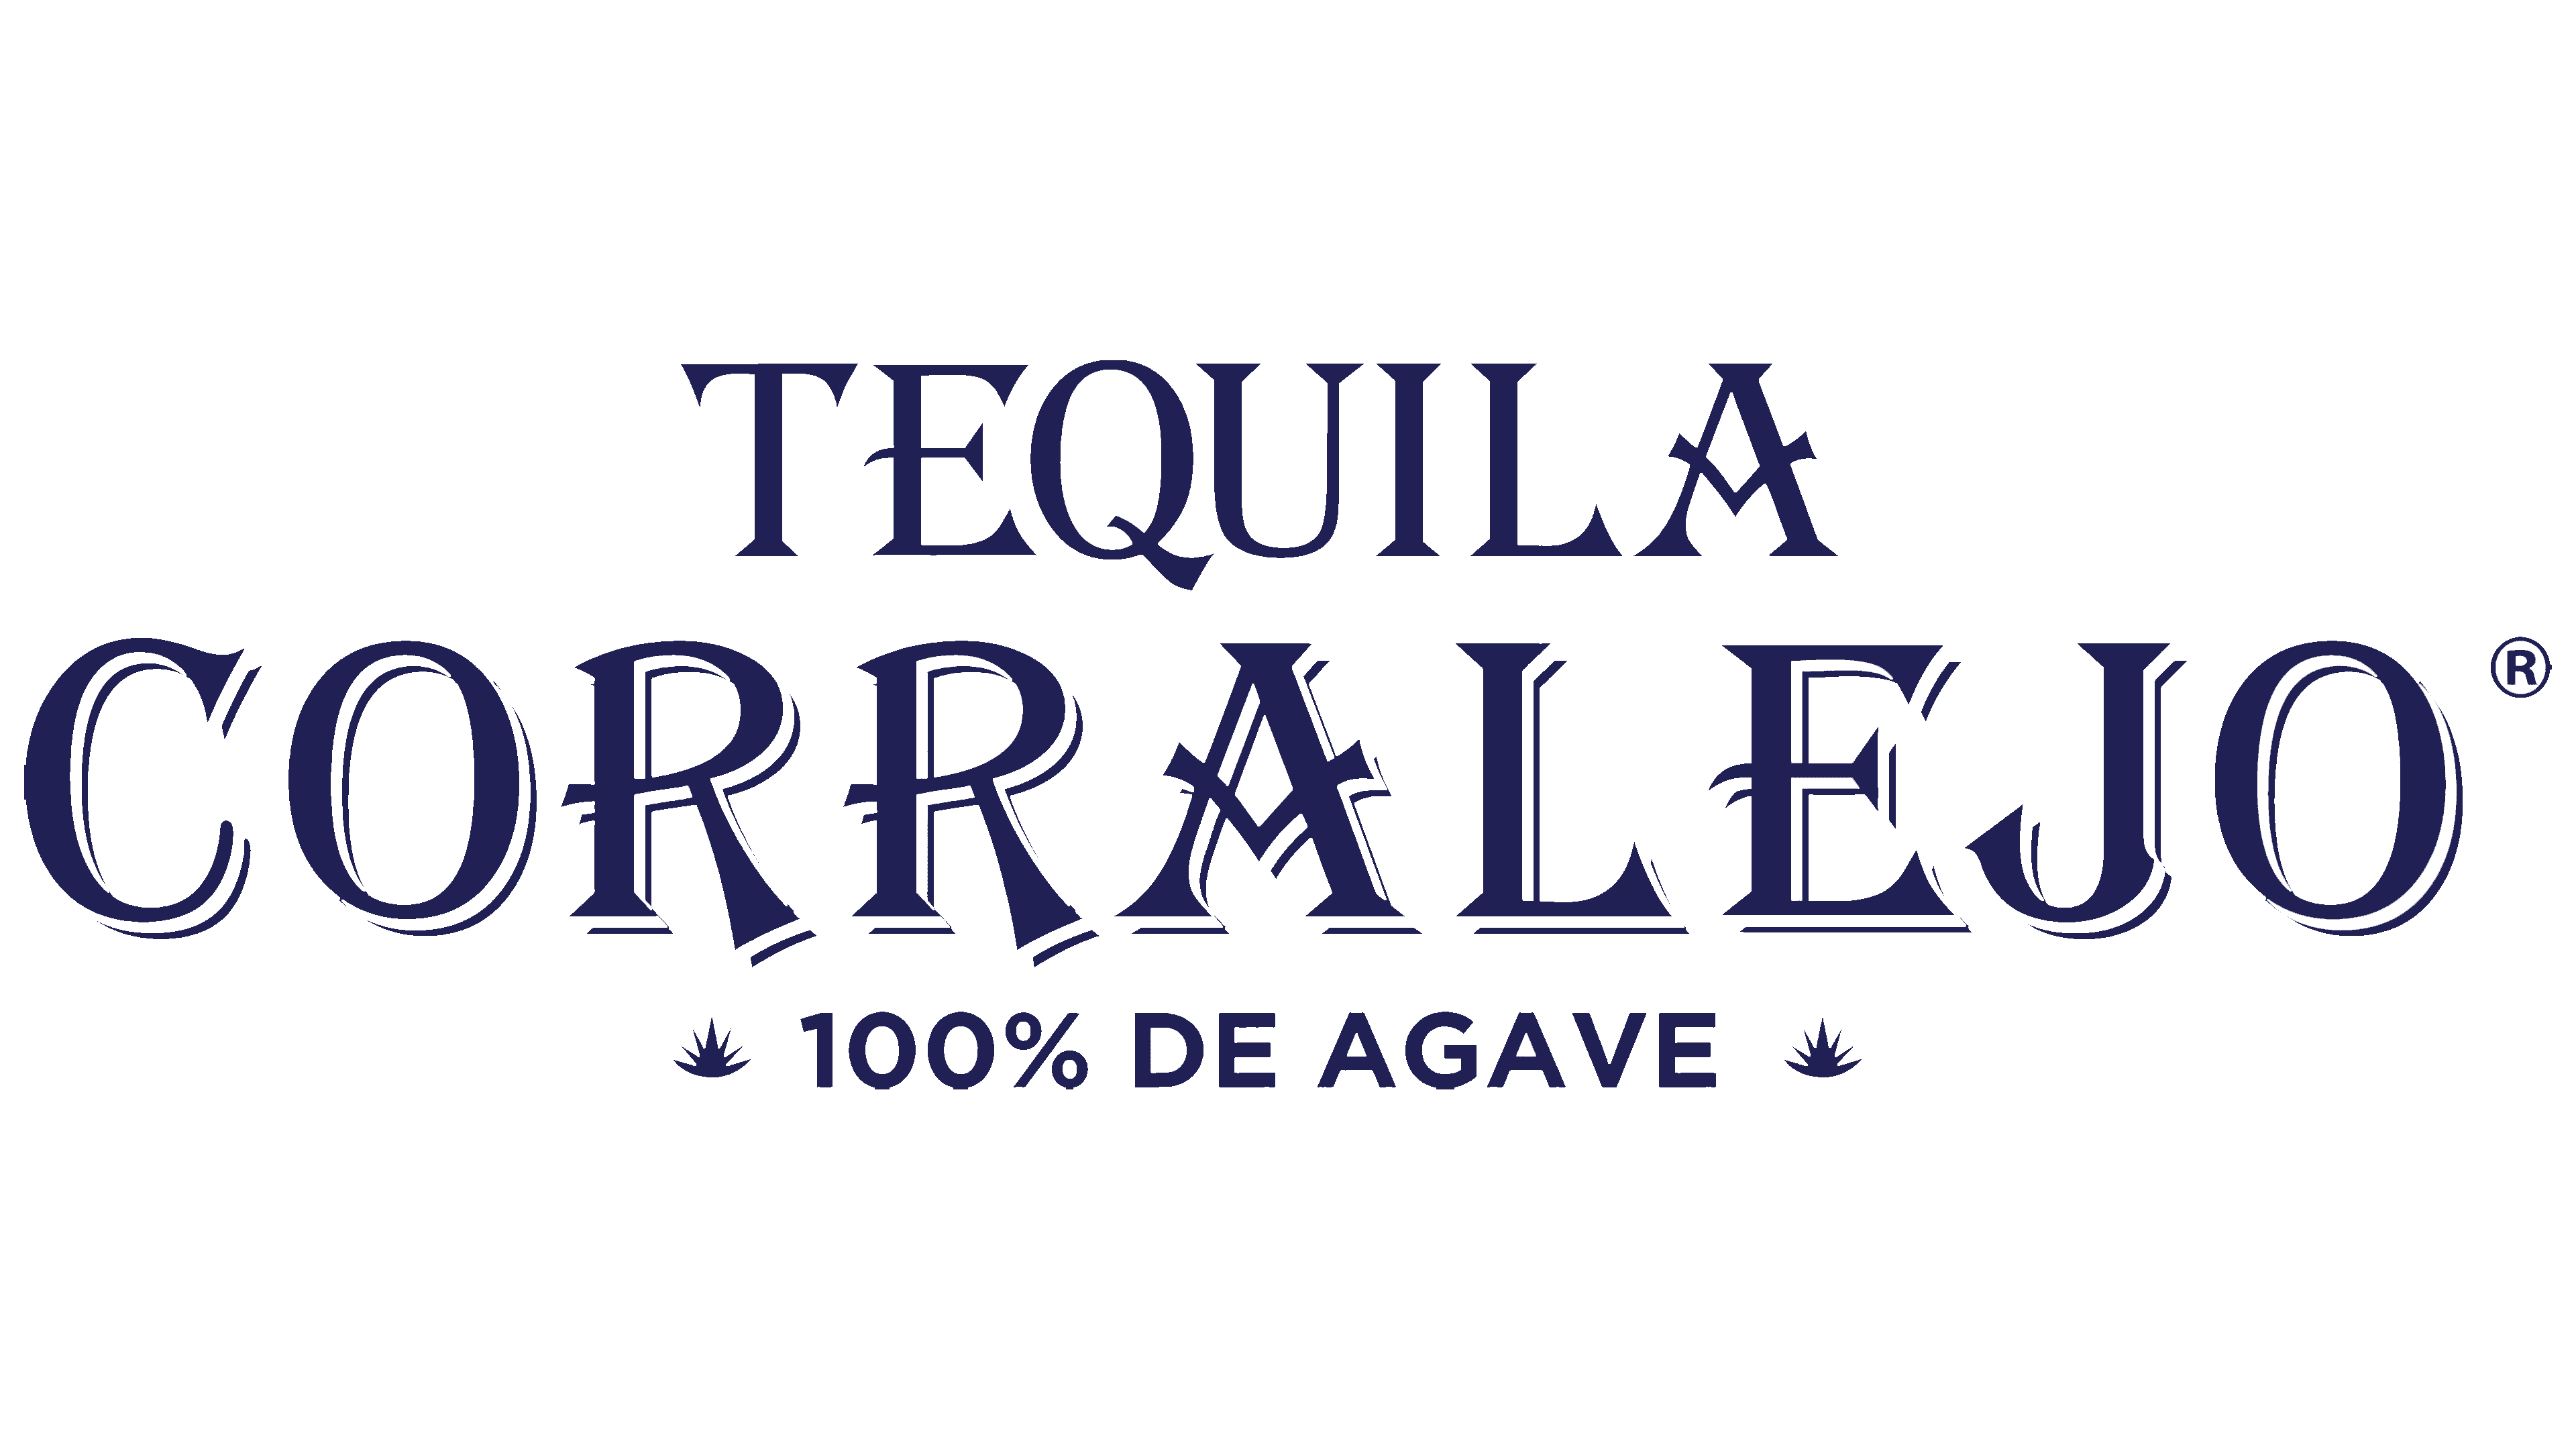 The Best Tequila Brands in 2023-2024